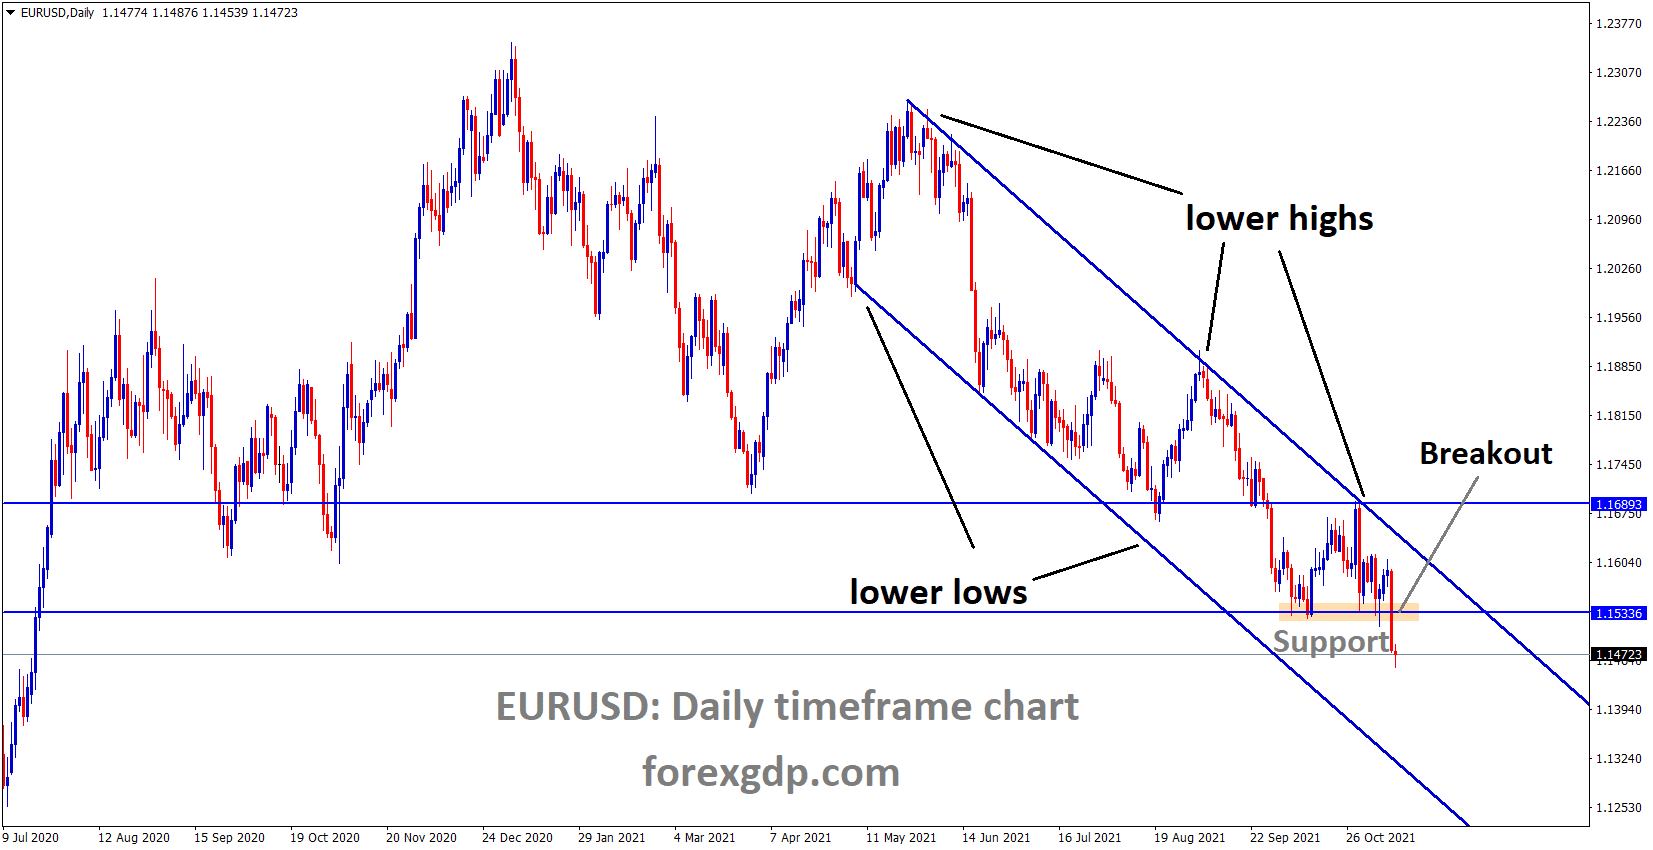 EURUSD is moving in the Descending channel and the market fell from the Lower high area